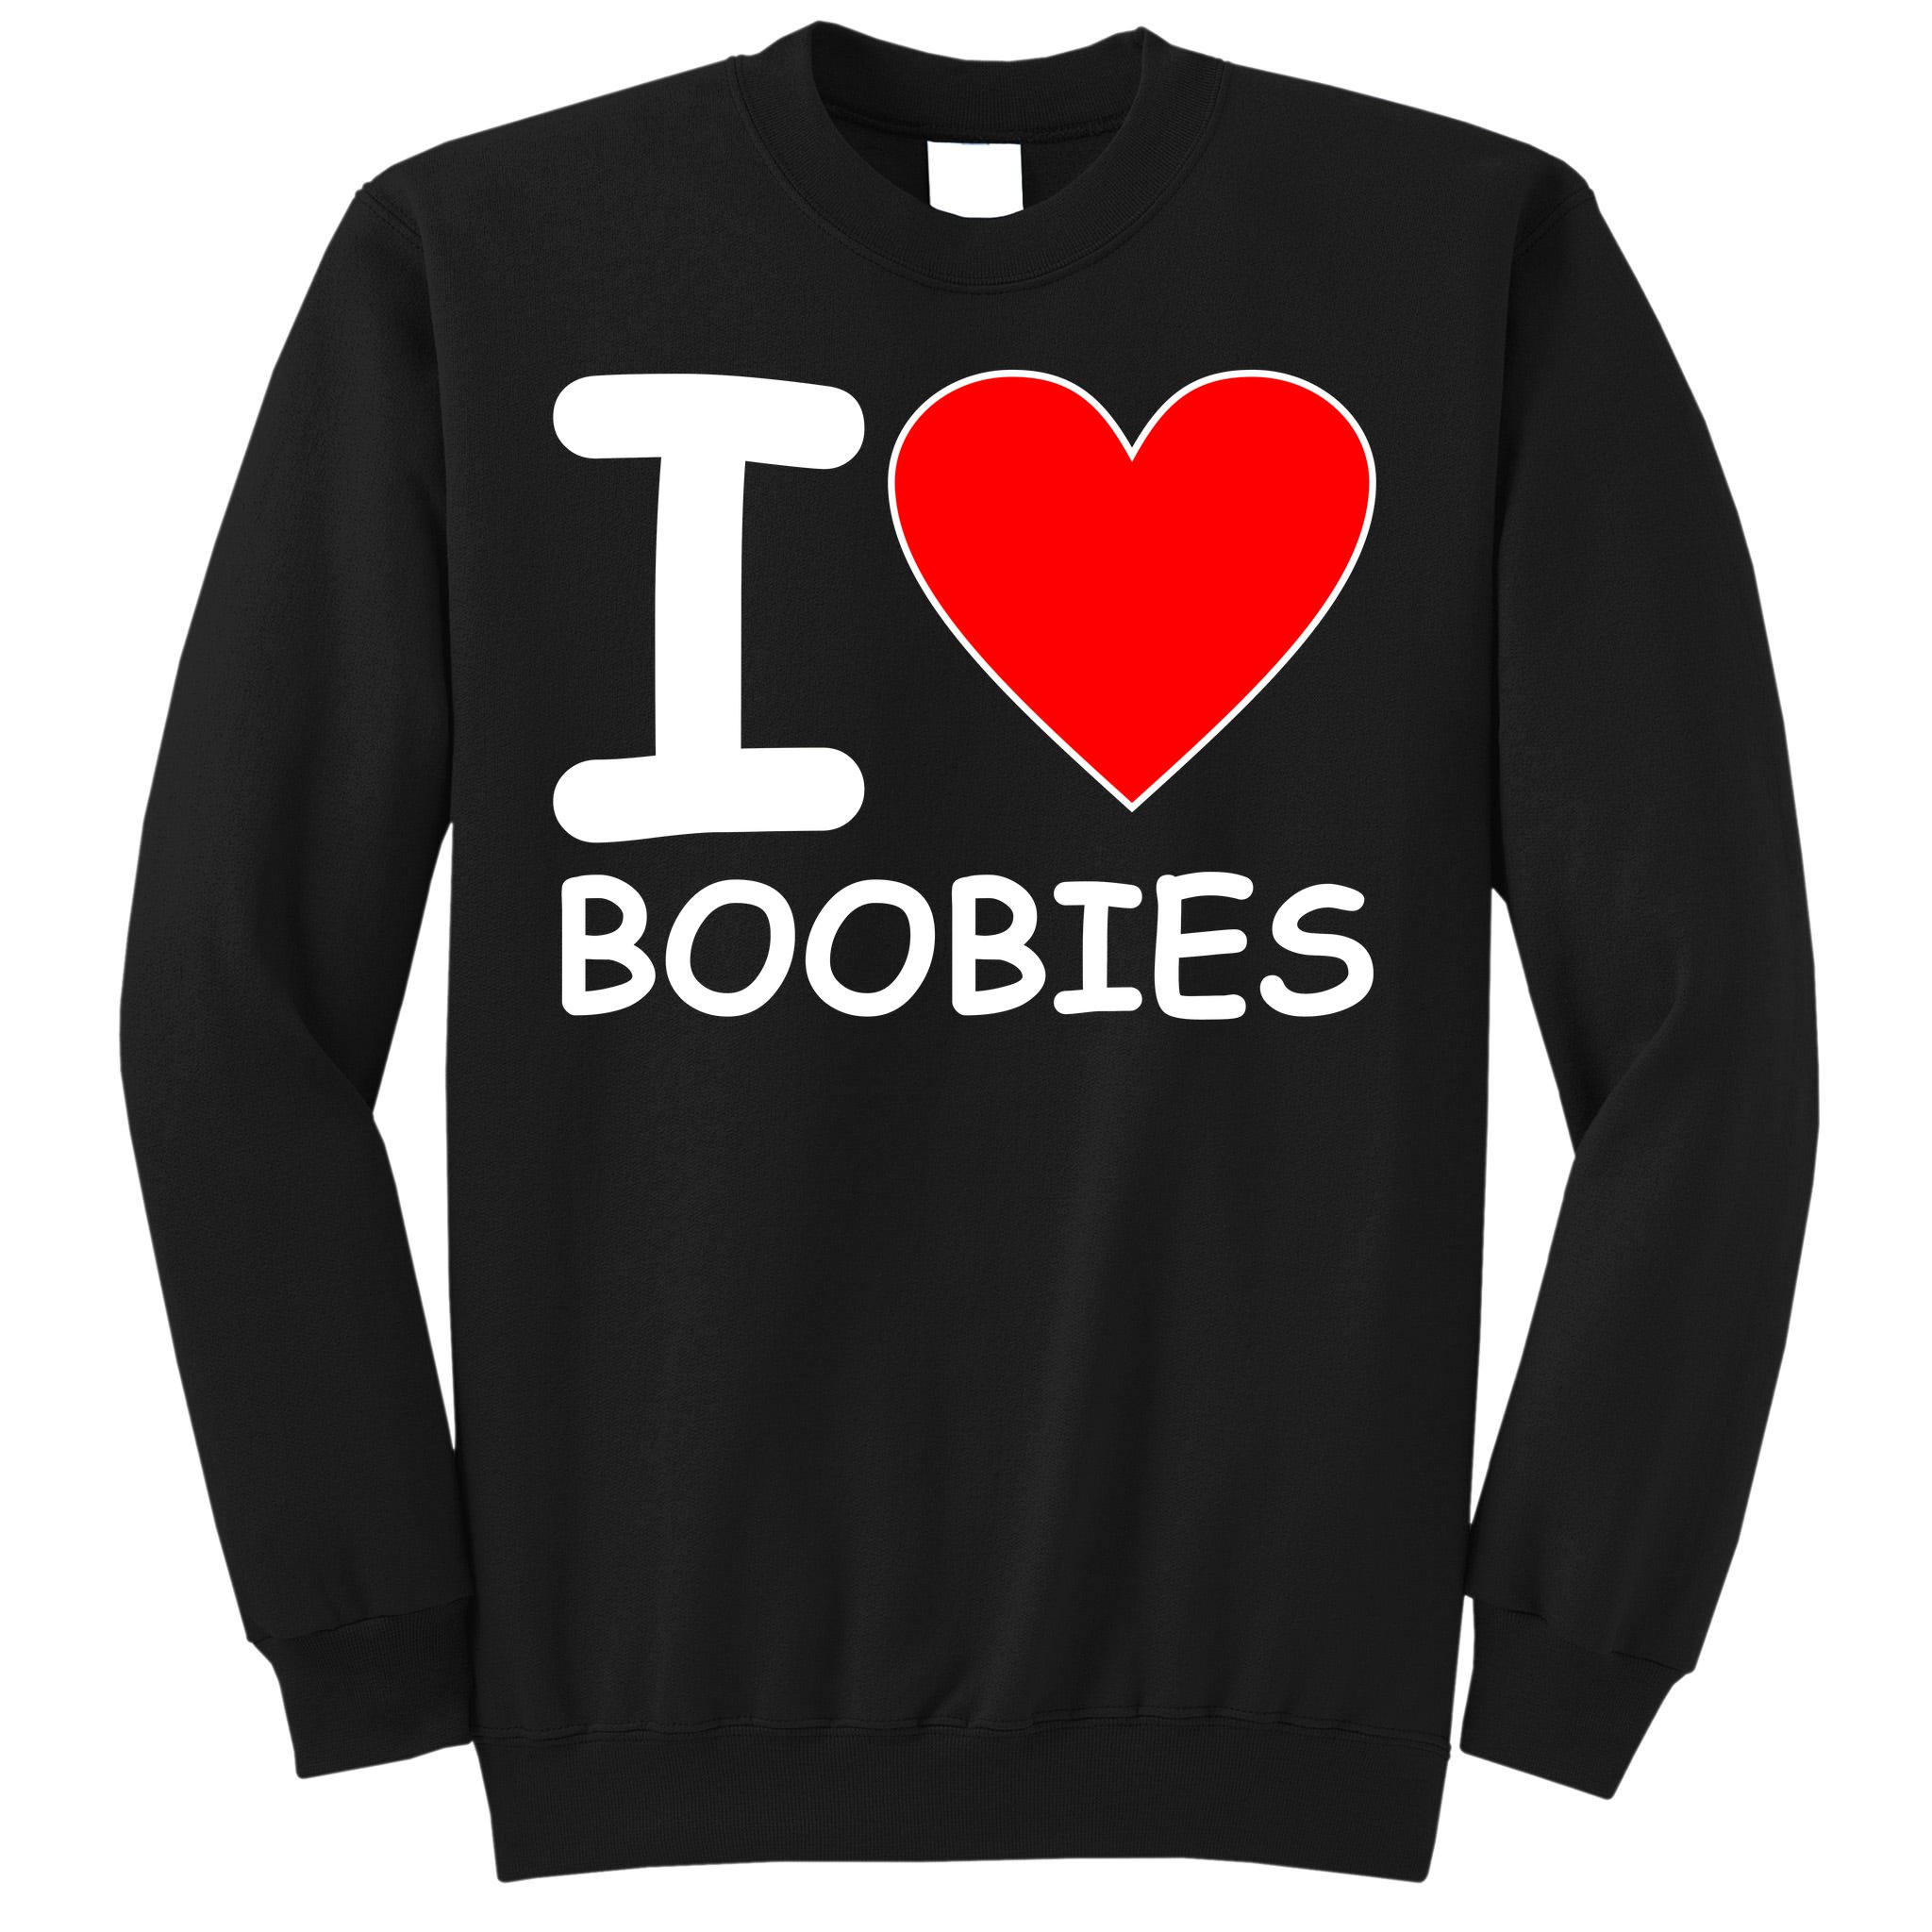 https://images3.teeshirtpalace.com/images/productImages/i-love-boobies--black-as-garment.jpg